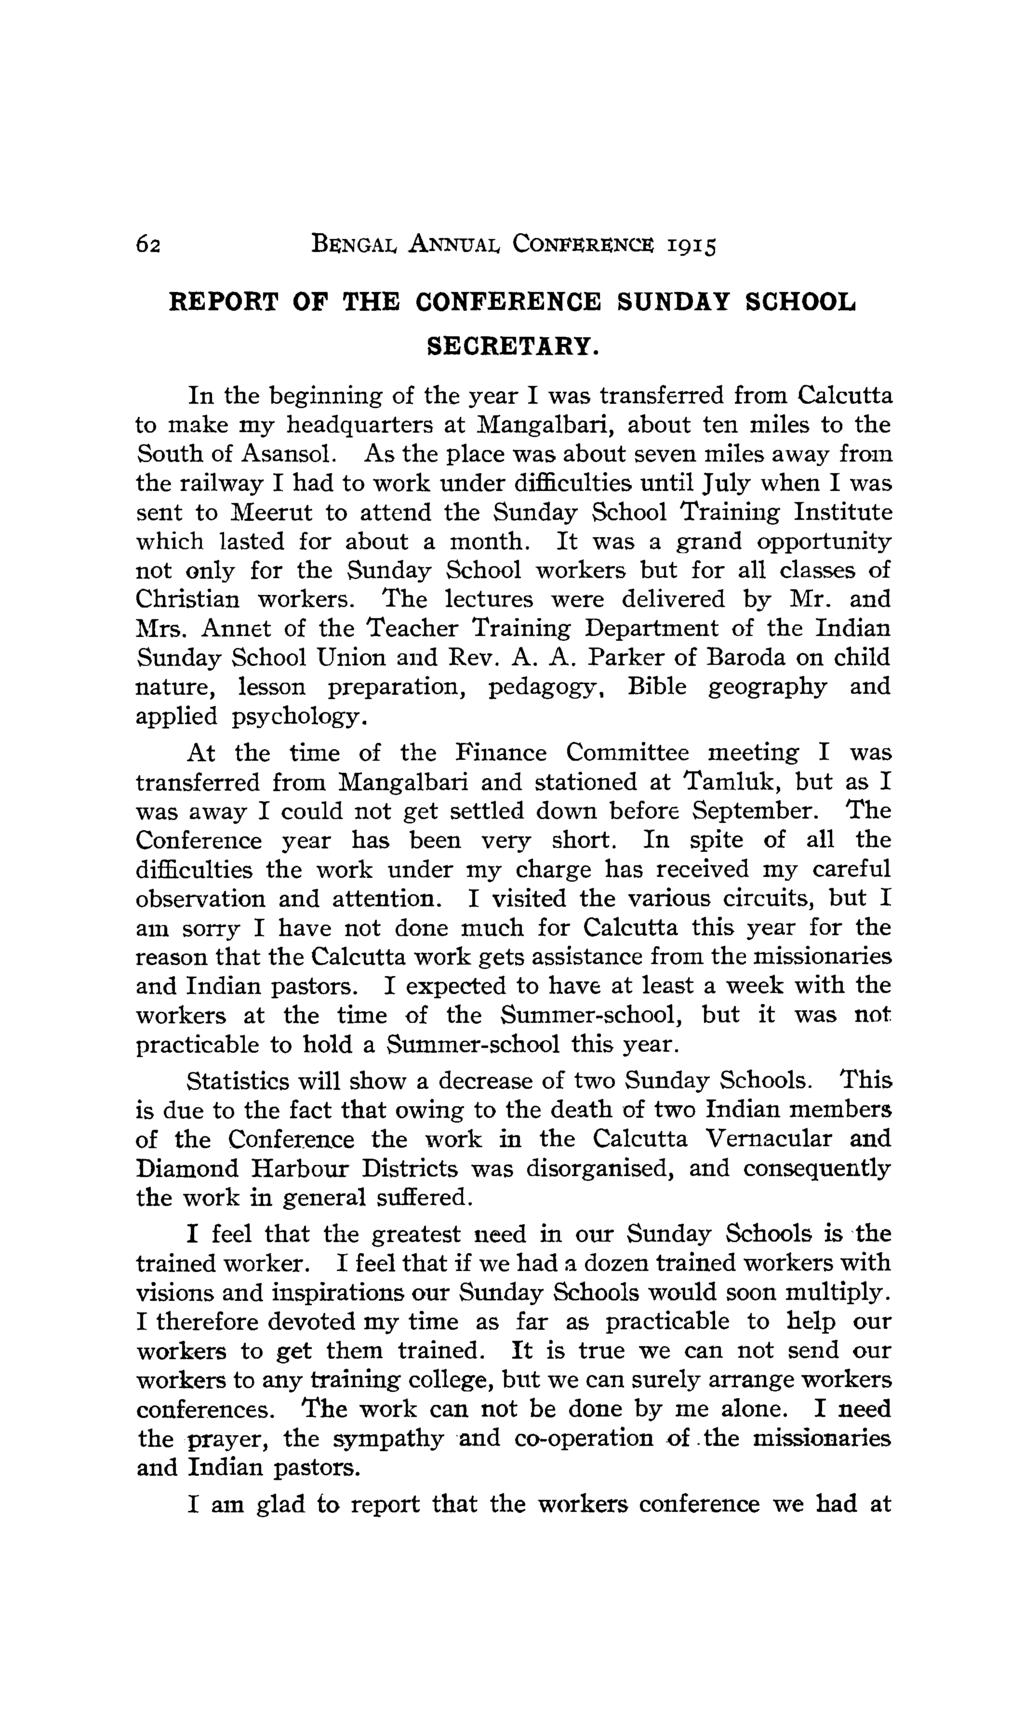 BENGAL ANNUAL CONFERENCE 1915 REPORT OF THE CONFERENCE SUNDAY SCHOOL SECRETARY.